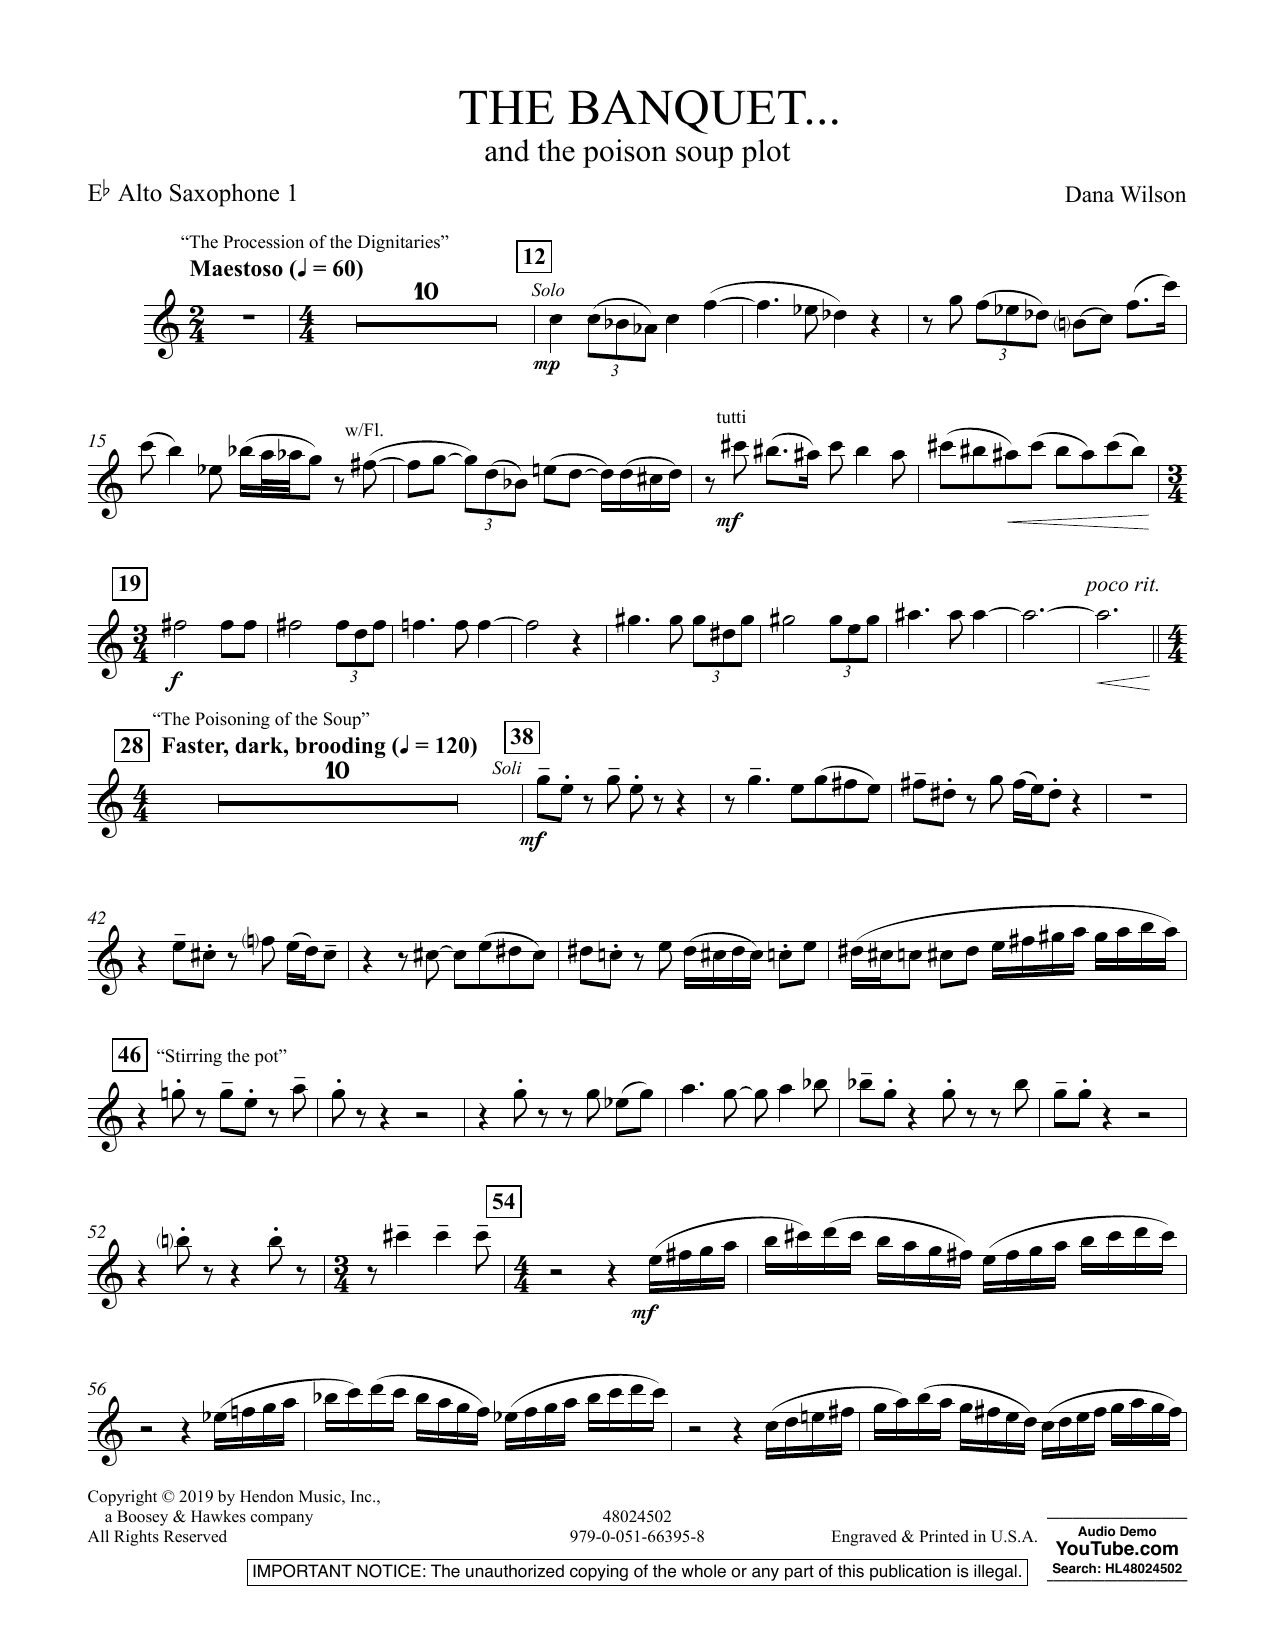 Dana Wilson The Banquet...and the poison soup plot - Eb Alto Saxophone 1 sheet music preview music notes and score for Concert Band including 3 page(s)